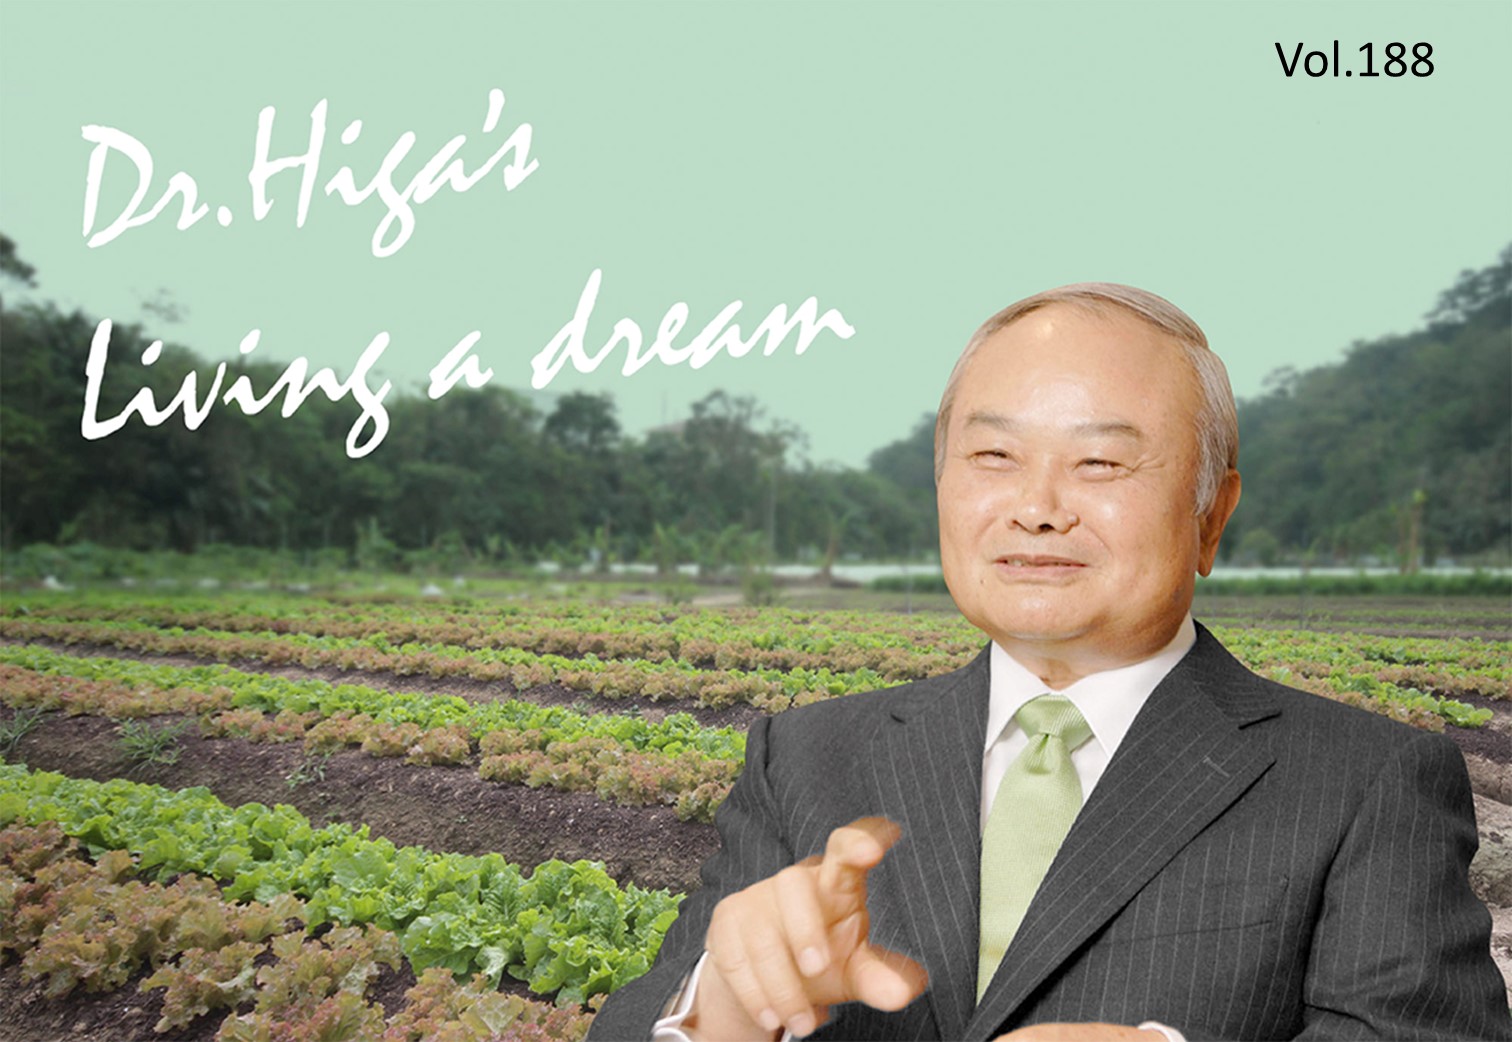 Dr. Higa's "Living a Dream": the latest article #188 is up!!!